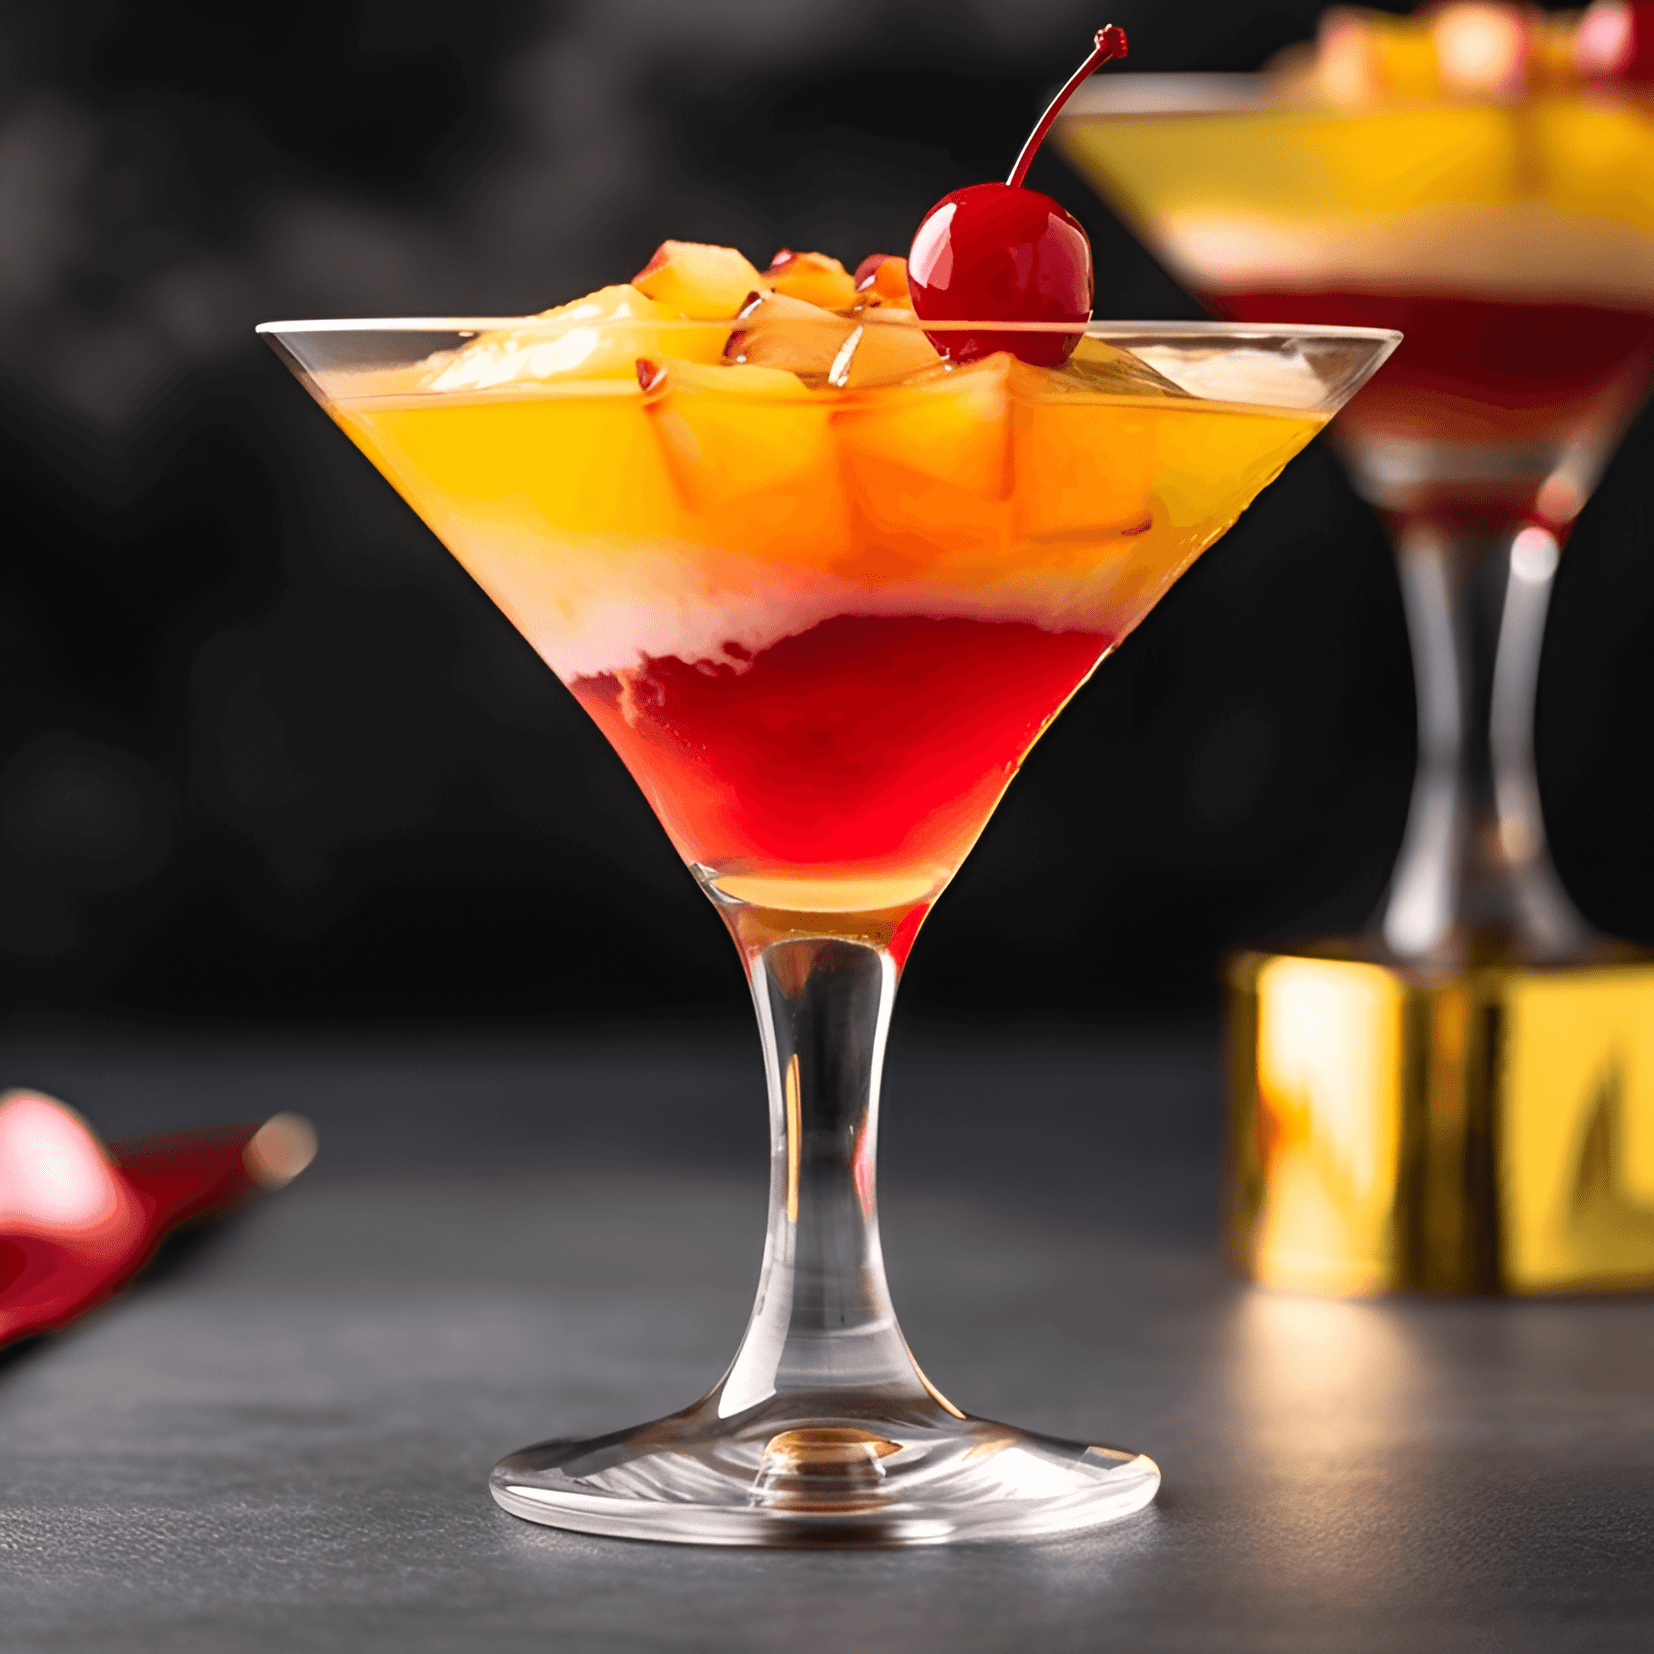 Pineapple Upside-Down Cake Cocktail Recipe - The Pineapple Upside-Down Cake cocktail is sweet, fruity, and slightly tangy. It has a rich, creamy texture with a hint of vanilla and a subtle warmth from the alcohol.